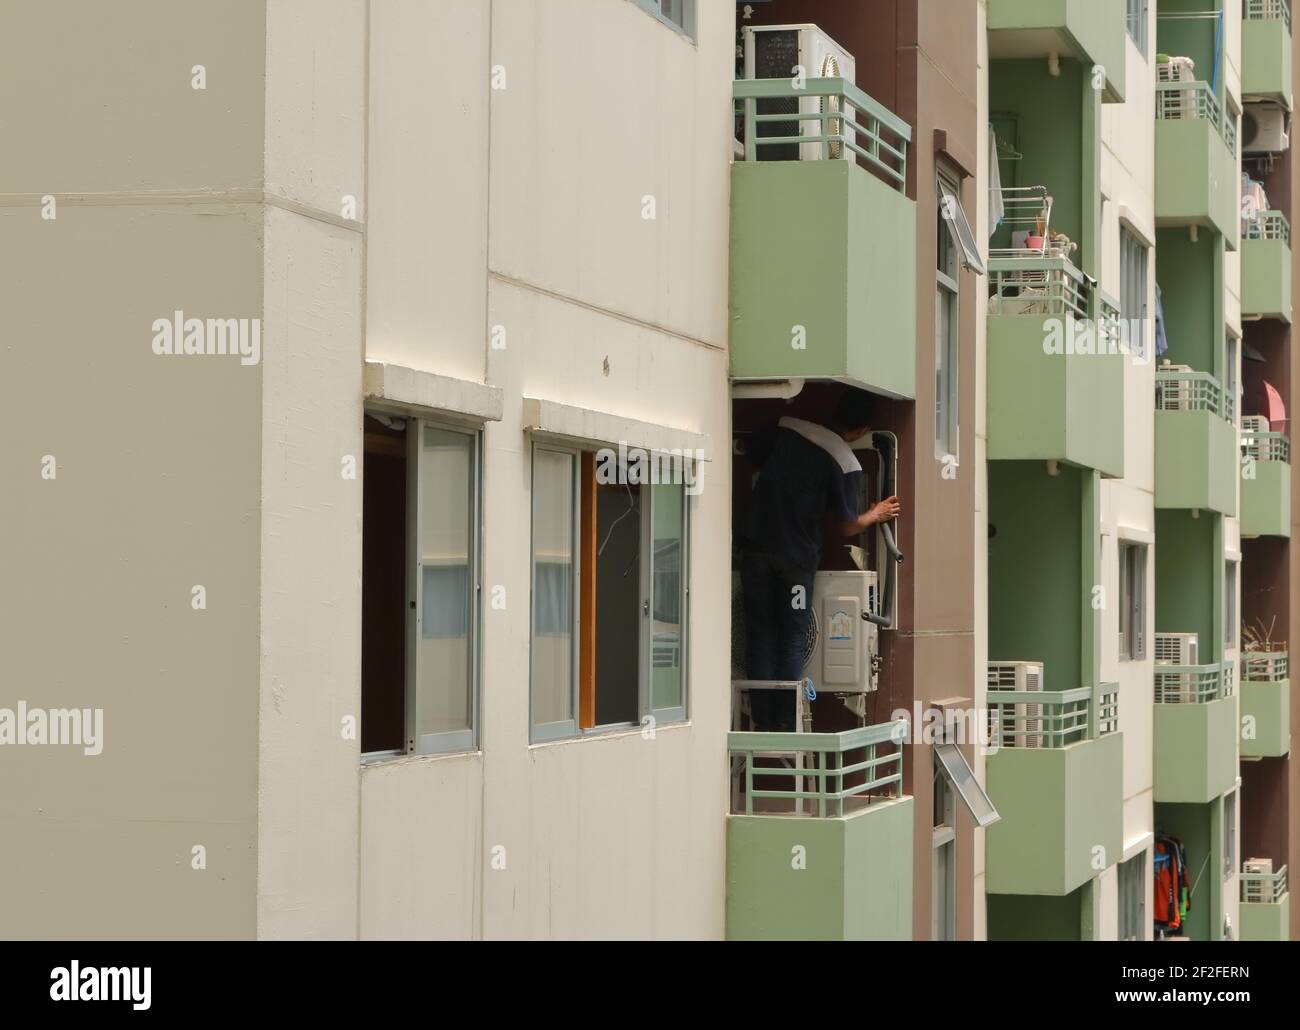 Bangkok, Thailand- March 11, 2021: A technician standing on ladder in balcony while installing refrigerant duct of air conditioning system Stock Photo